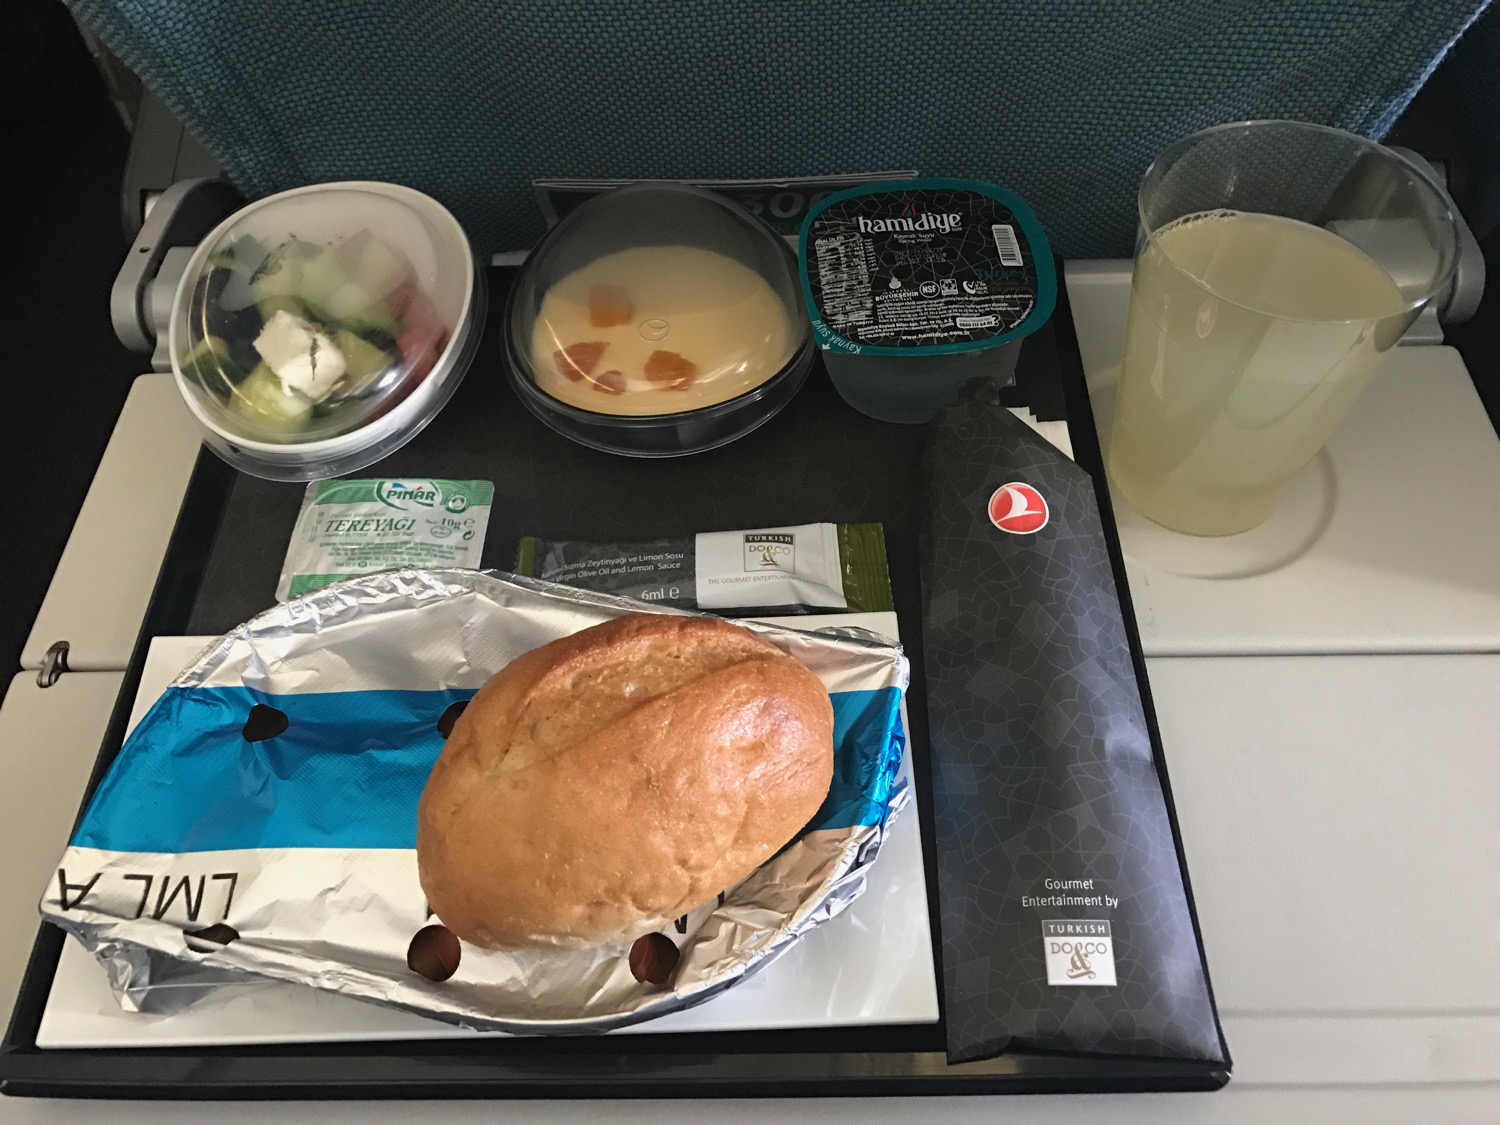 Turkish Airlines Economy Class Meals - 9